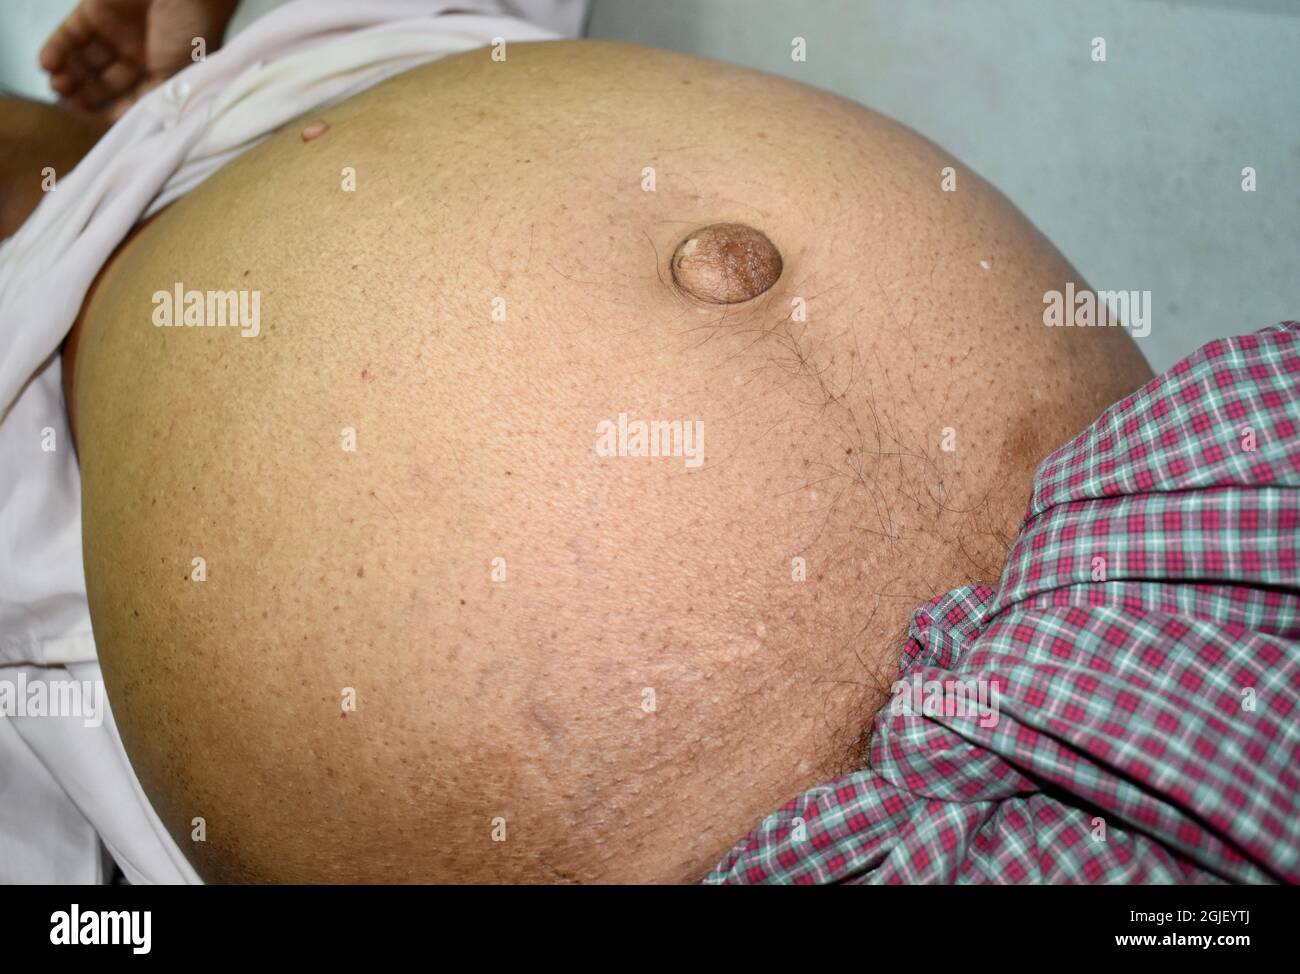 Abdominal fat in patient with ascities and paraumbilical hernia. Flank is full. Right lower view. Stock Photo